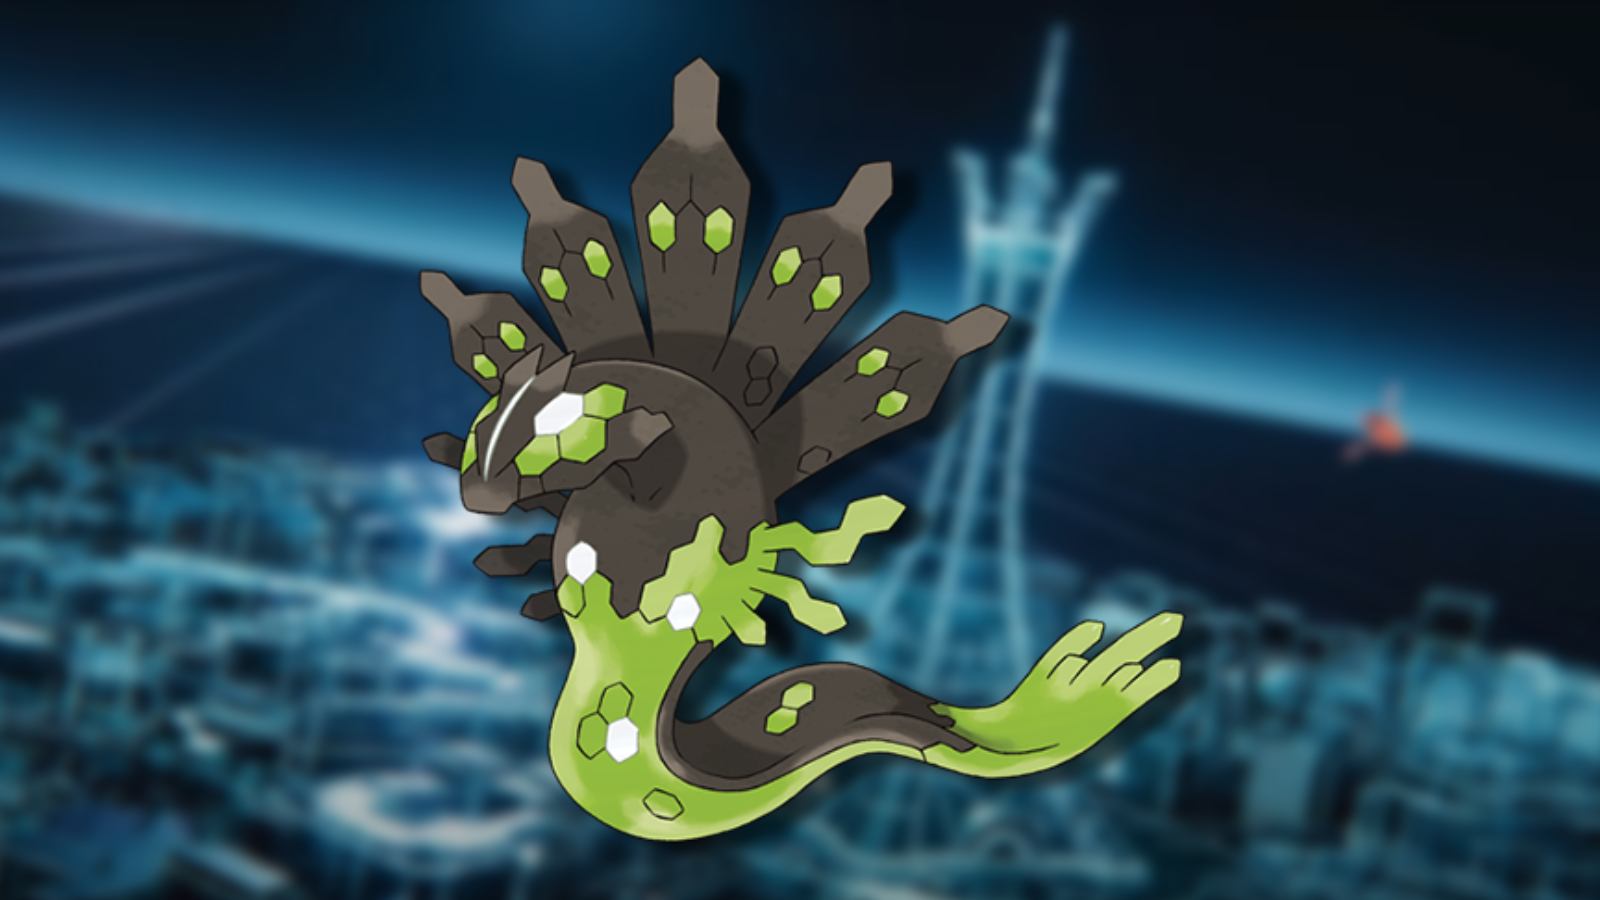 The legendary Pokemon Zygarde appears against a blurred image of Lumiose City from Pokemon Legends Z-A